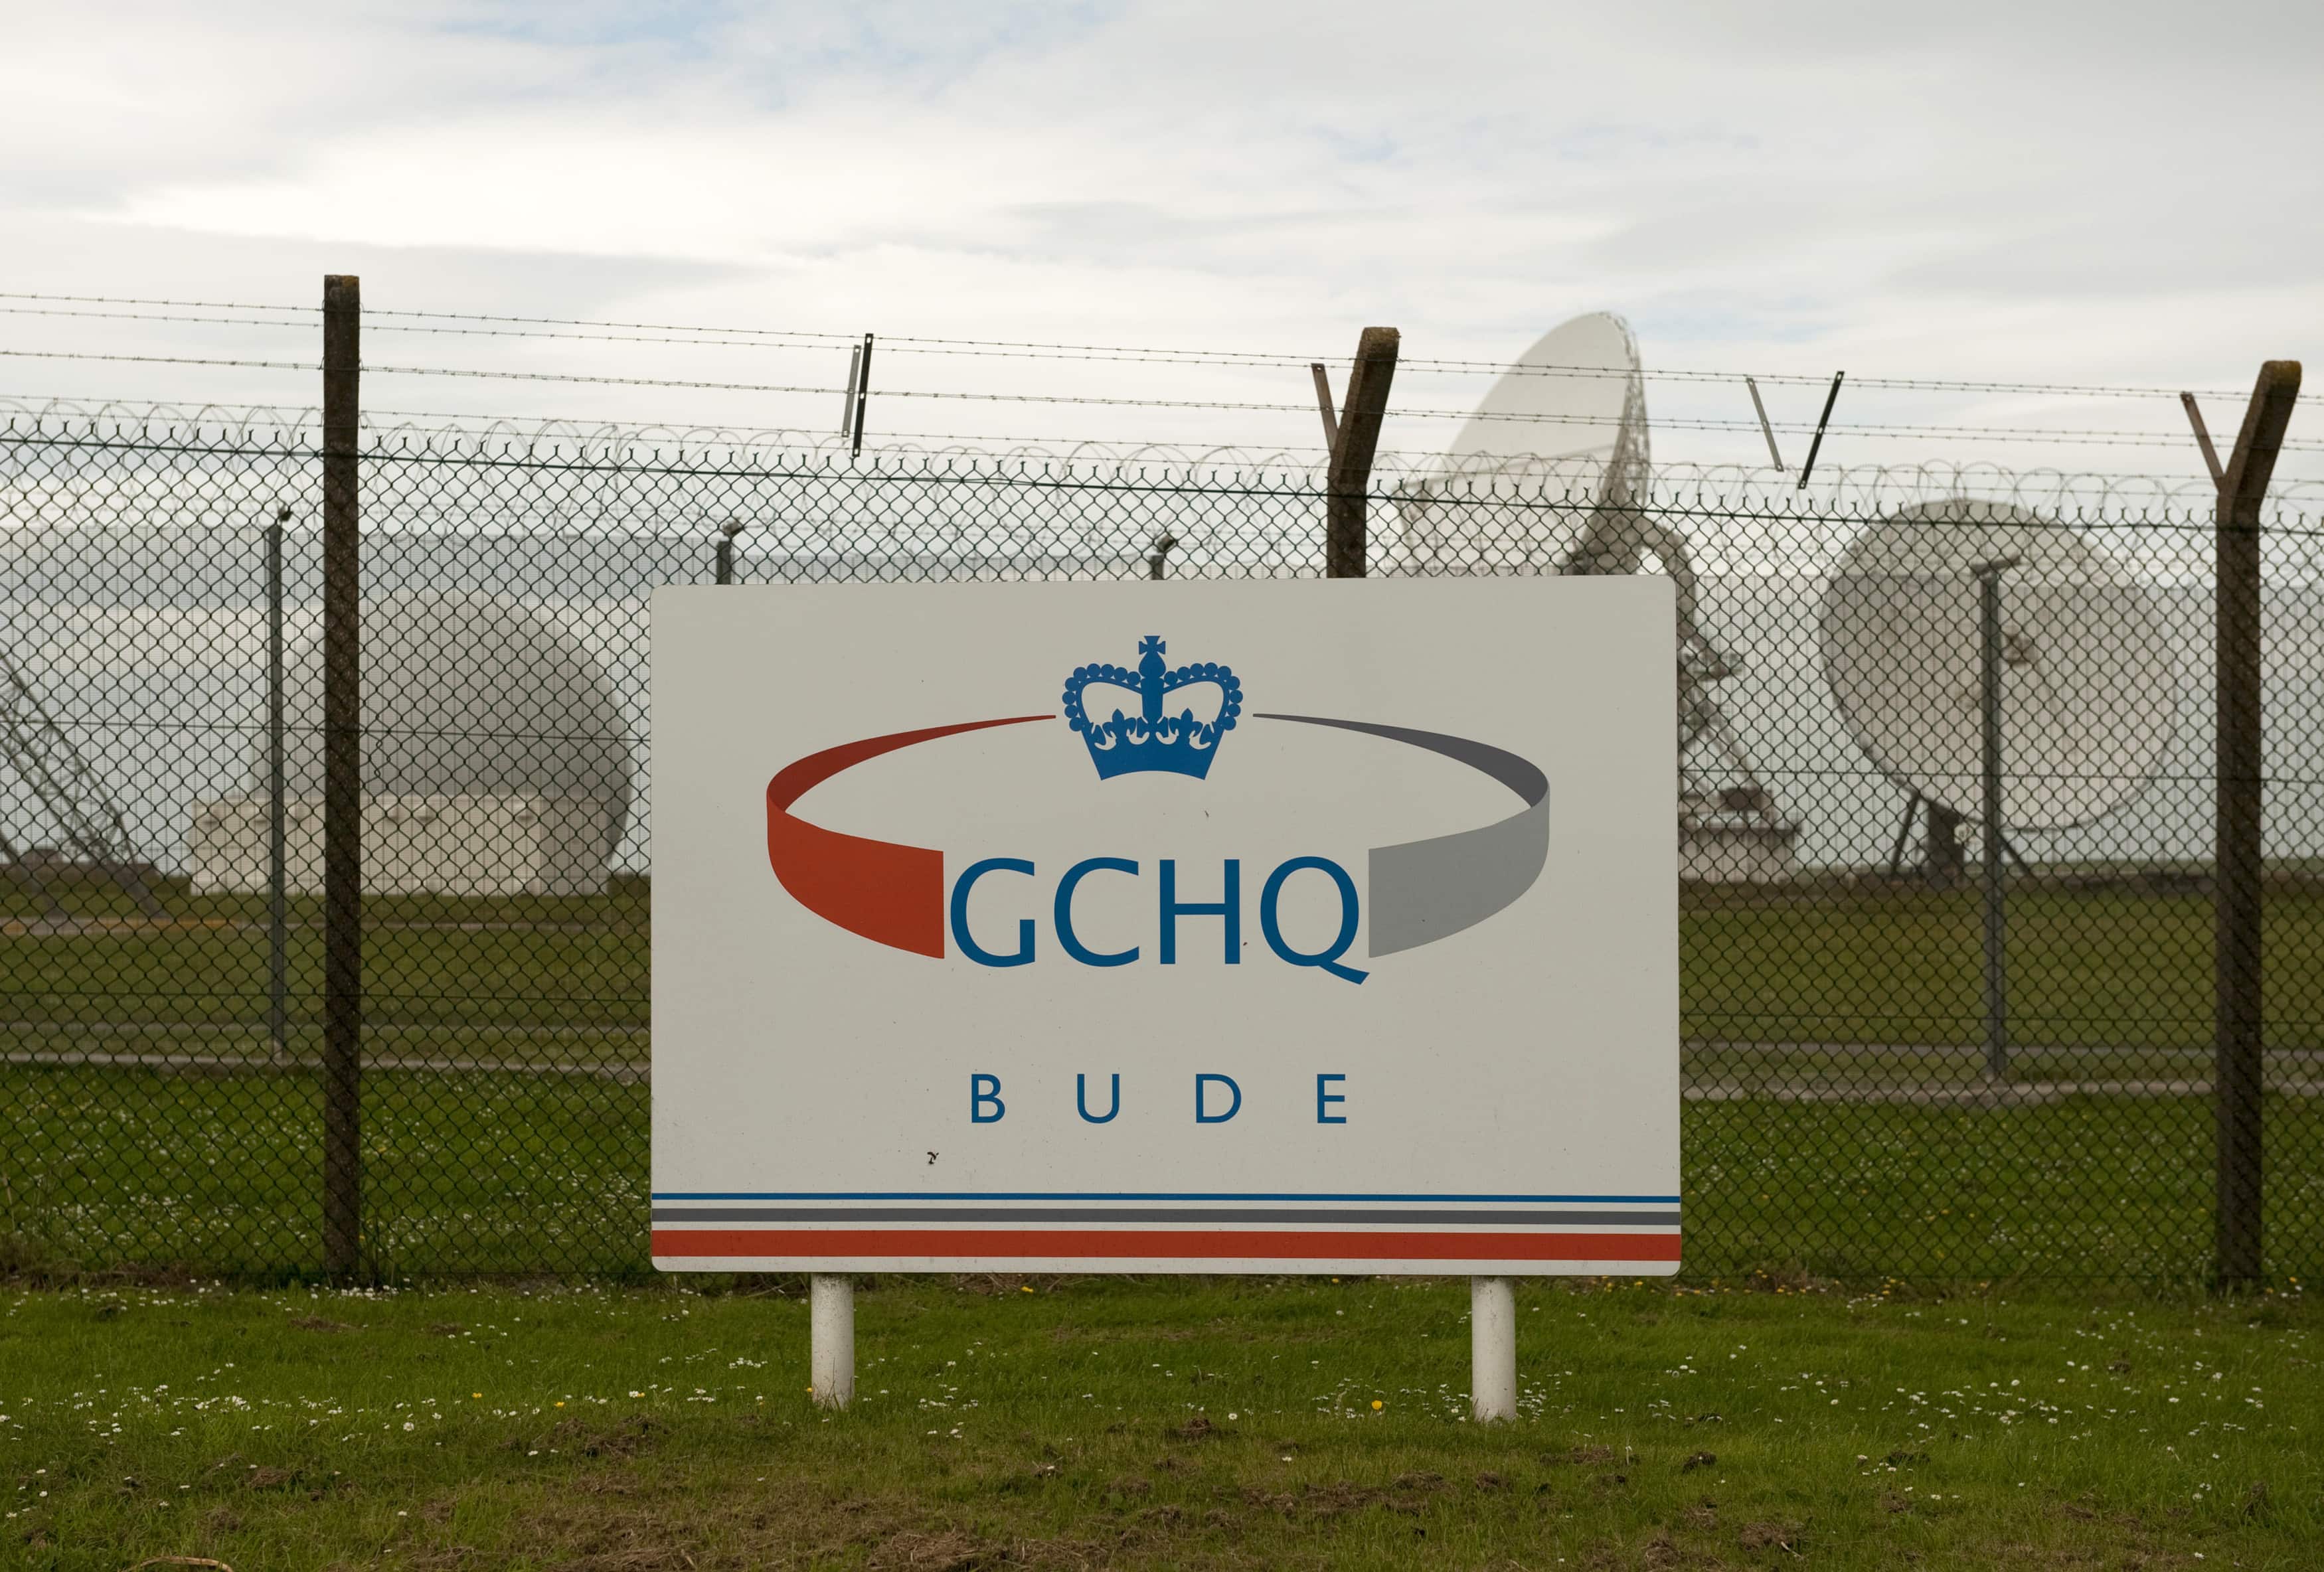 2013 file photo of satellite dishes at the outpost of the GCHQ [Britain's spy agency] in Bude, Cornwall, REUTERS/Kieran Doherty